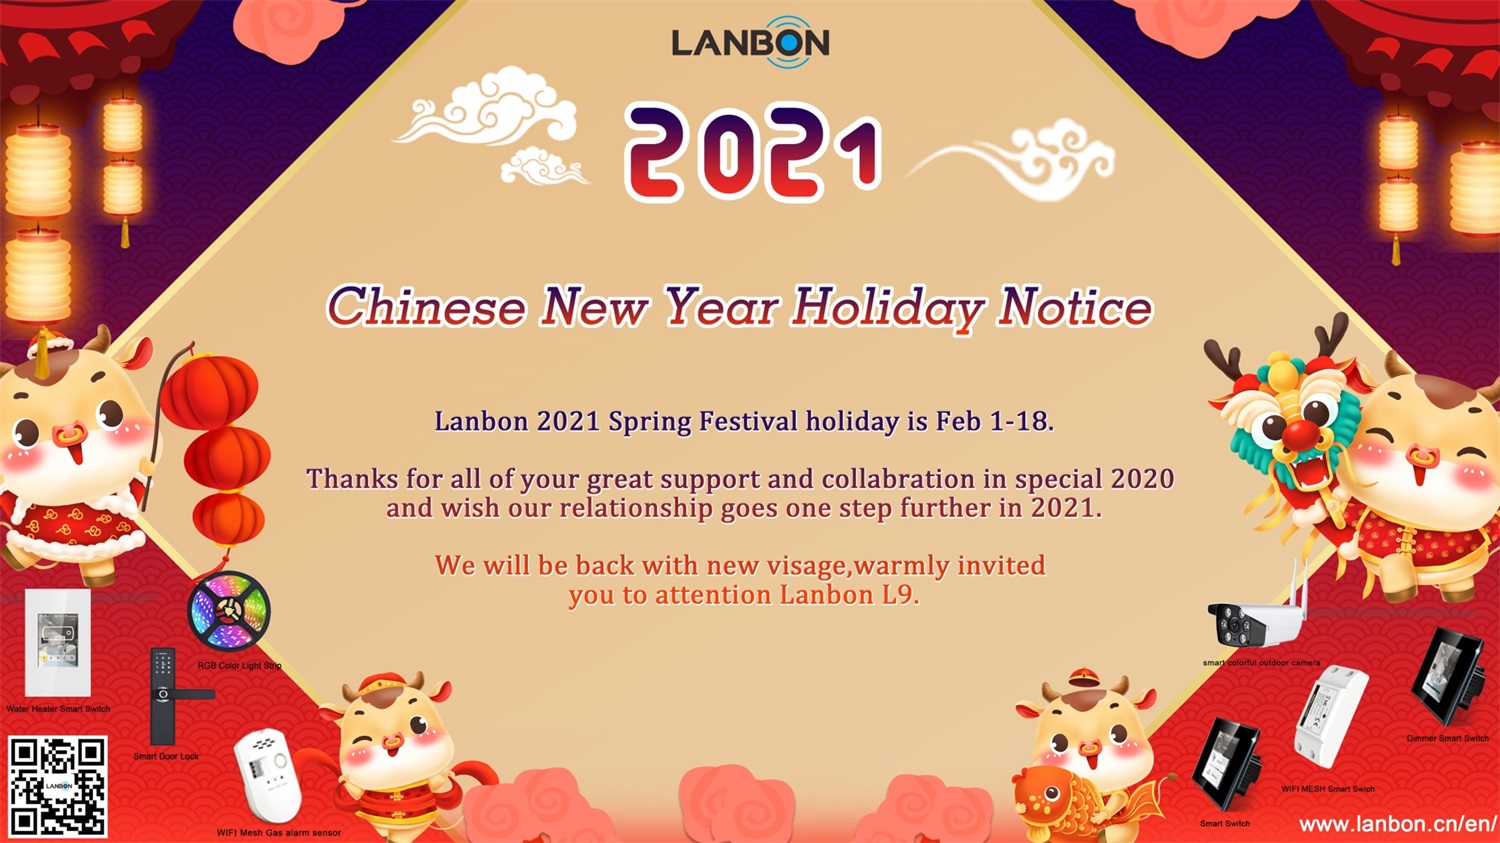 Chinese New Year Holiday Notice .jpg